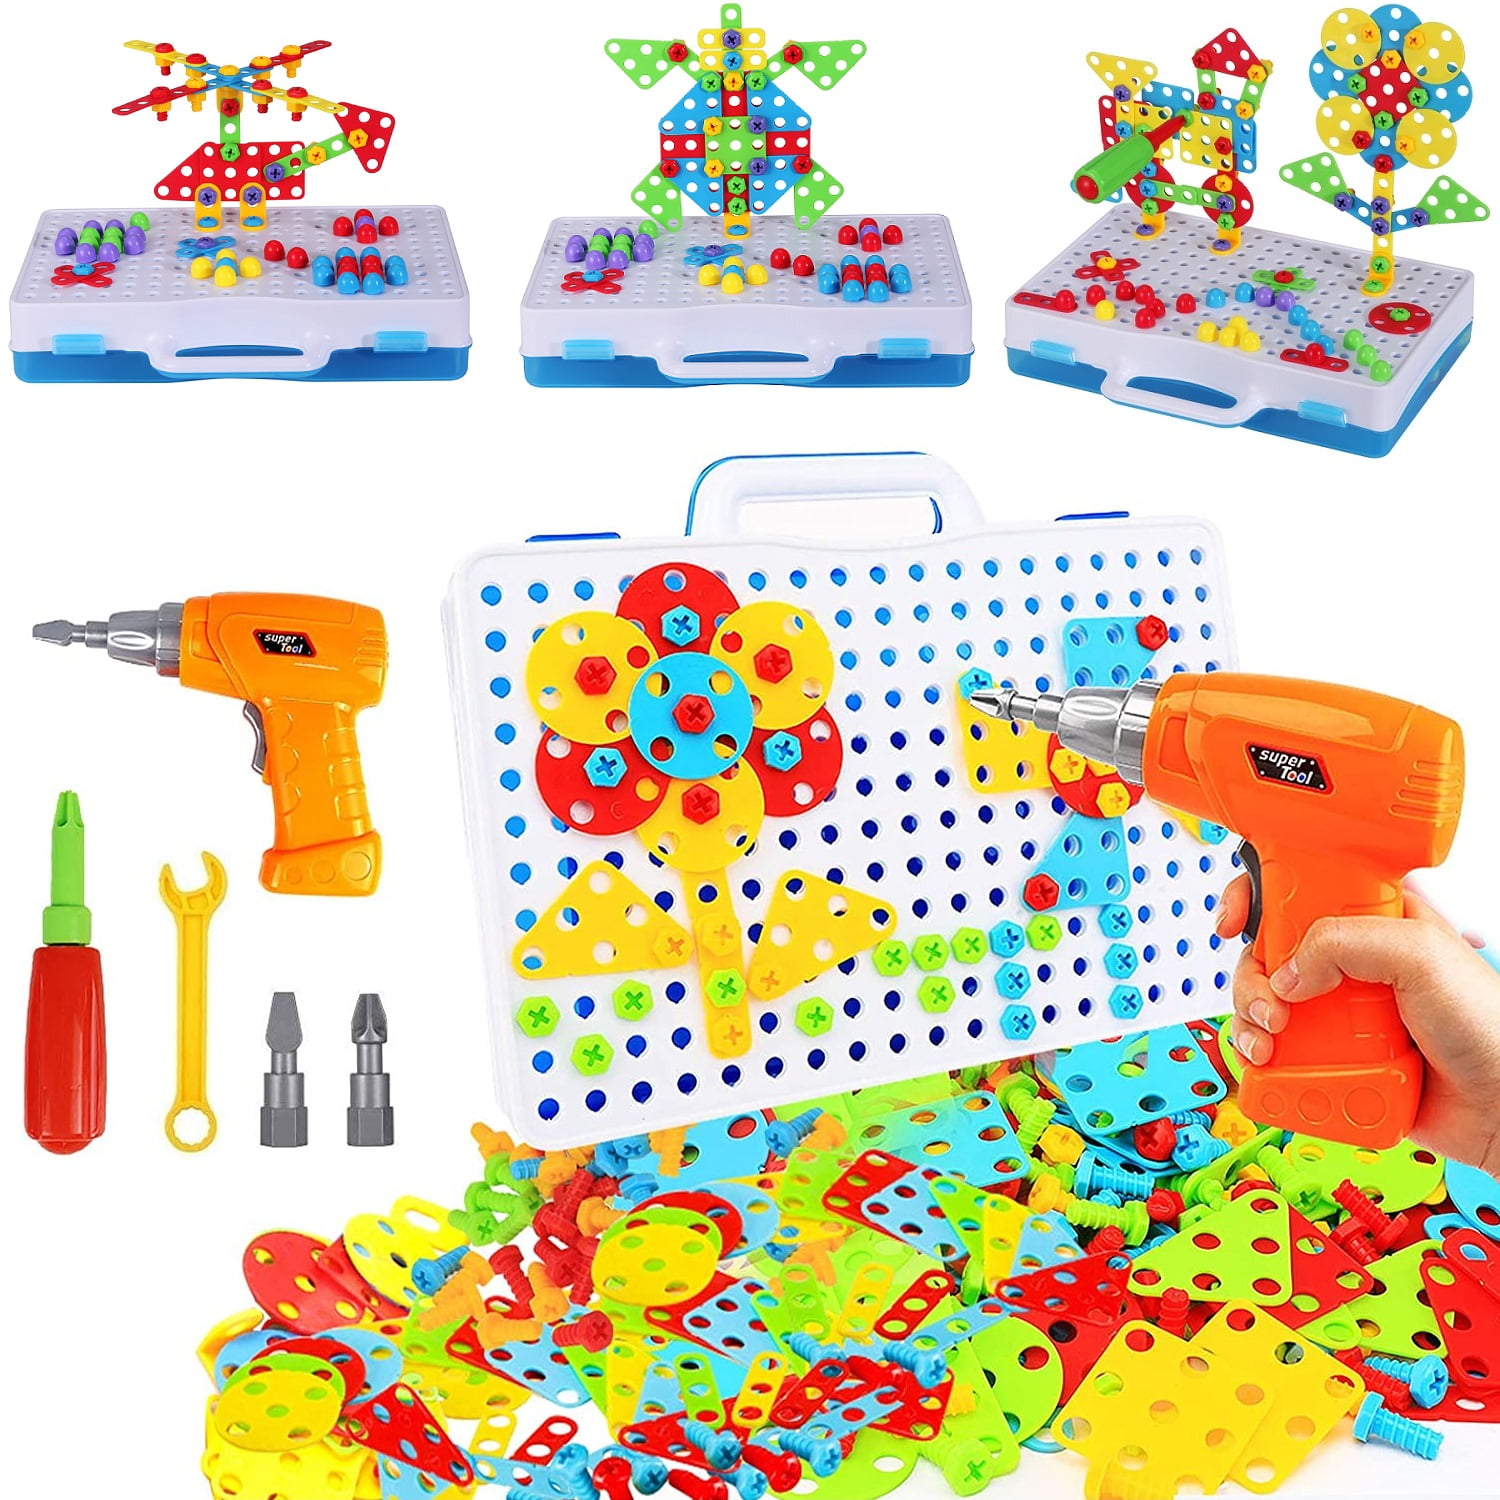  Kids Tool Bench - Kids Tool Set with Electric Toy Drill and  Realistic Tools,78 Piece Toddler Tool Set Pretend Play for Toddlers 3-5,Boy  Toys Age 5-6 Years Old : Toys & Games